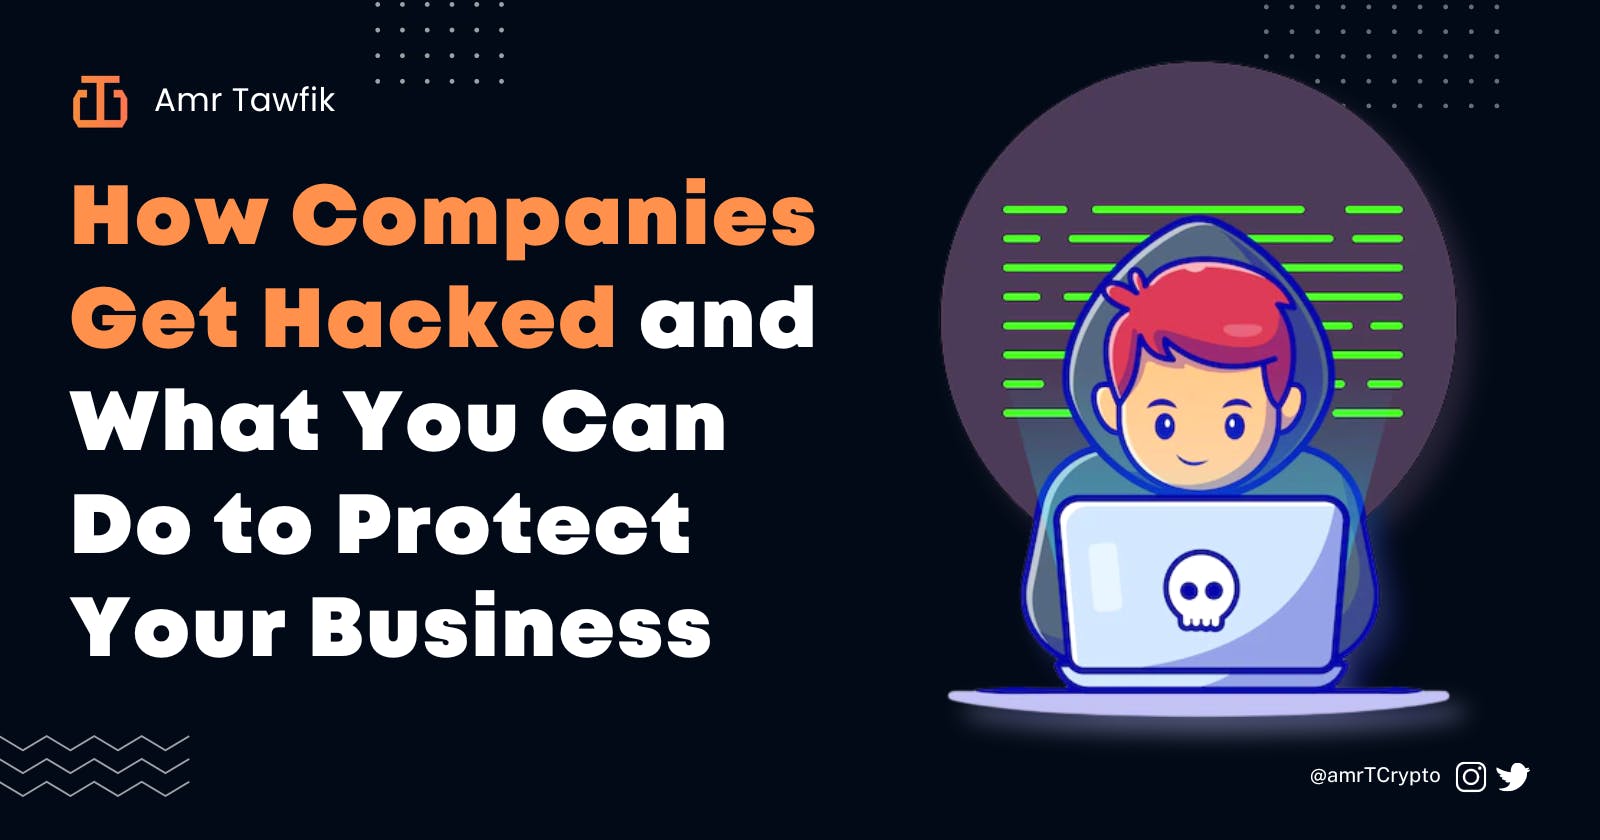 How Companies Get Hacked and What You Can Do to Protect Your Business